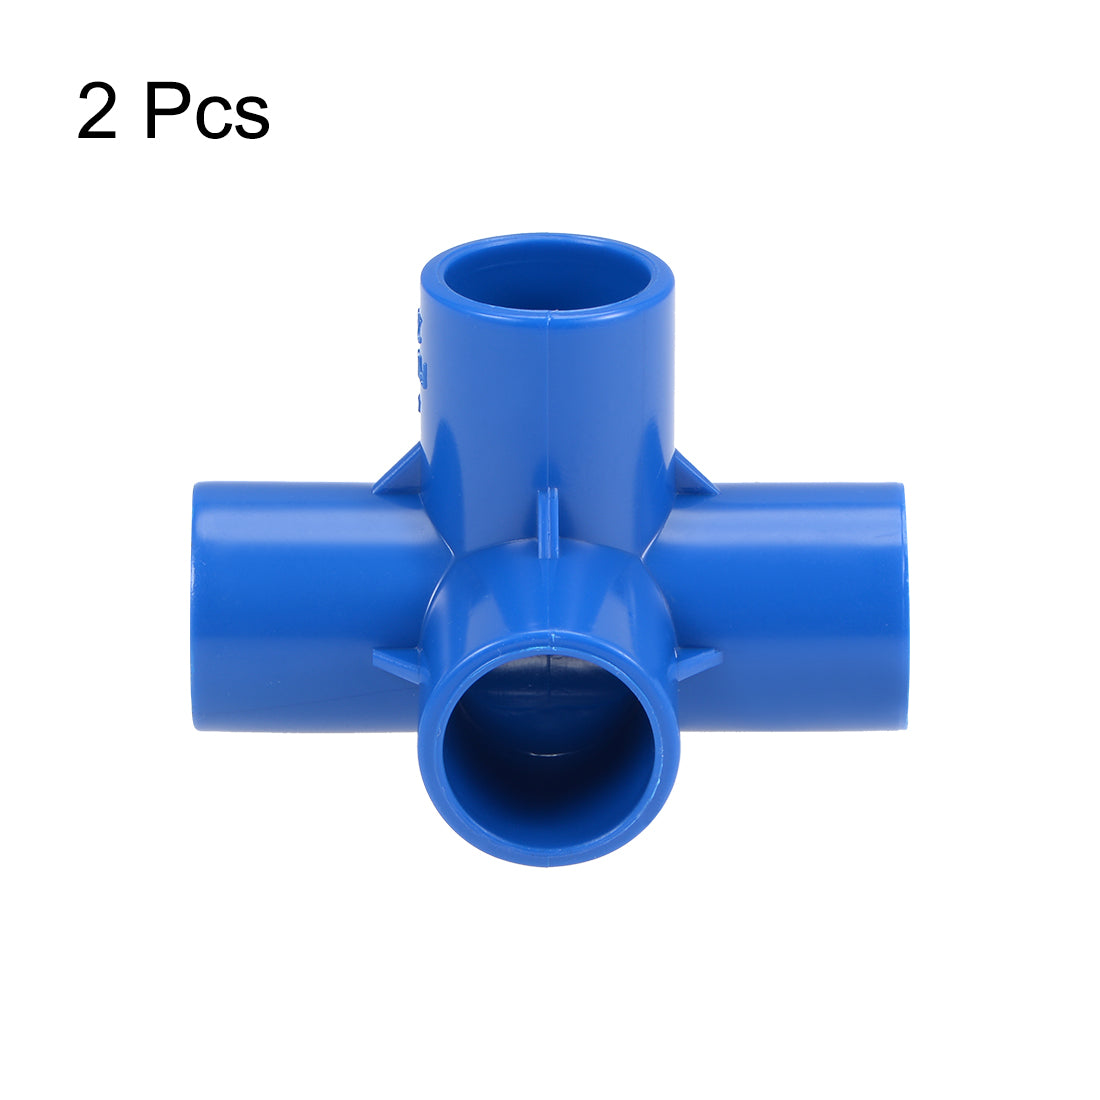 uxcell Uxcell 4 Way 20mm Tee Metric PVC Fitting Elbow - PVC Furniture - PVC Elbow Fittings Blue 2Pcs